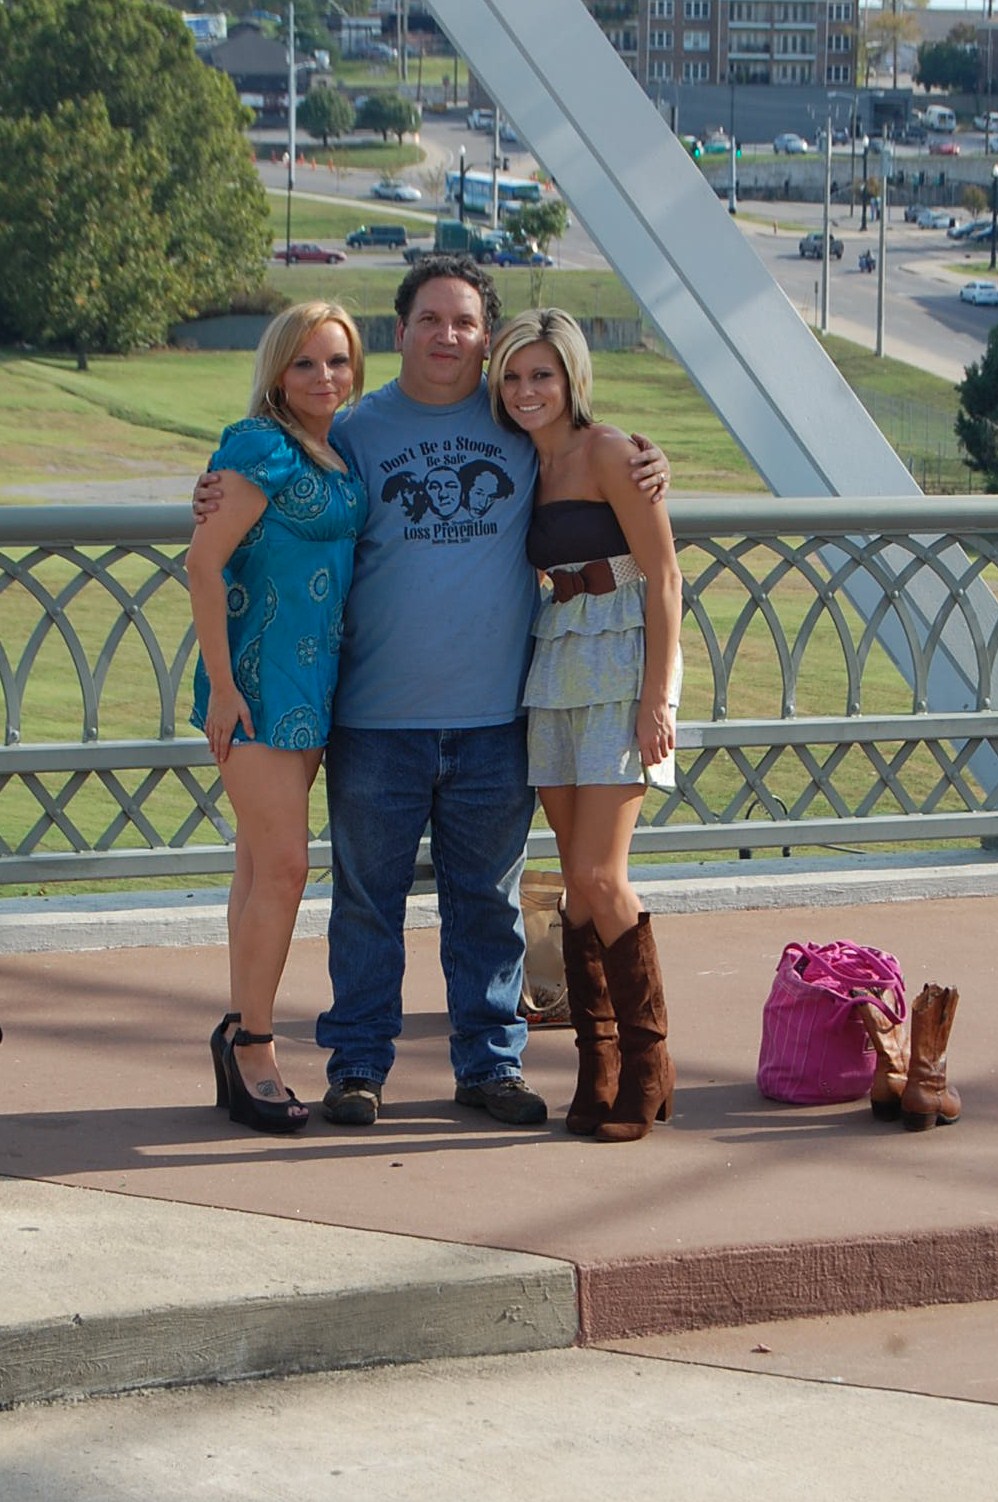 James Magnum Cook with Models Barbie White and Terri Lynn in Nashville, TN. This was after a Photo Shoot With Ken Shelton and Hot Stuff Magazine!